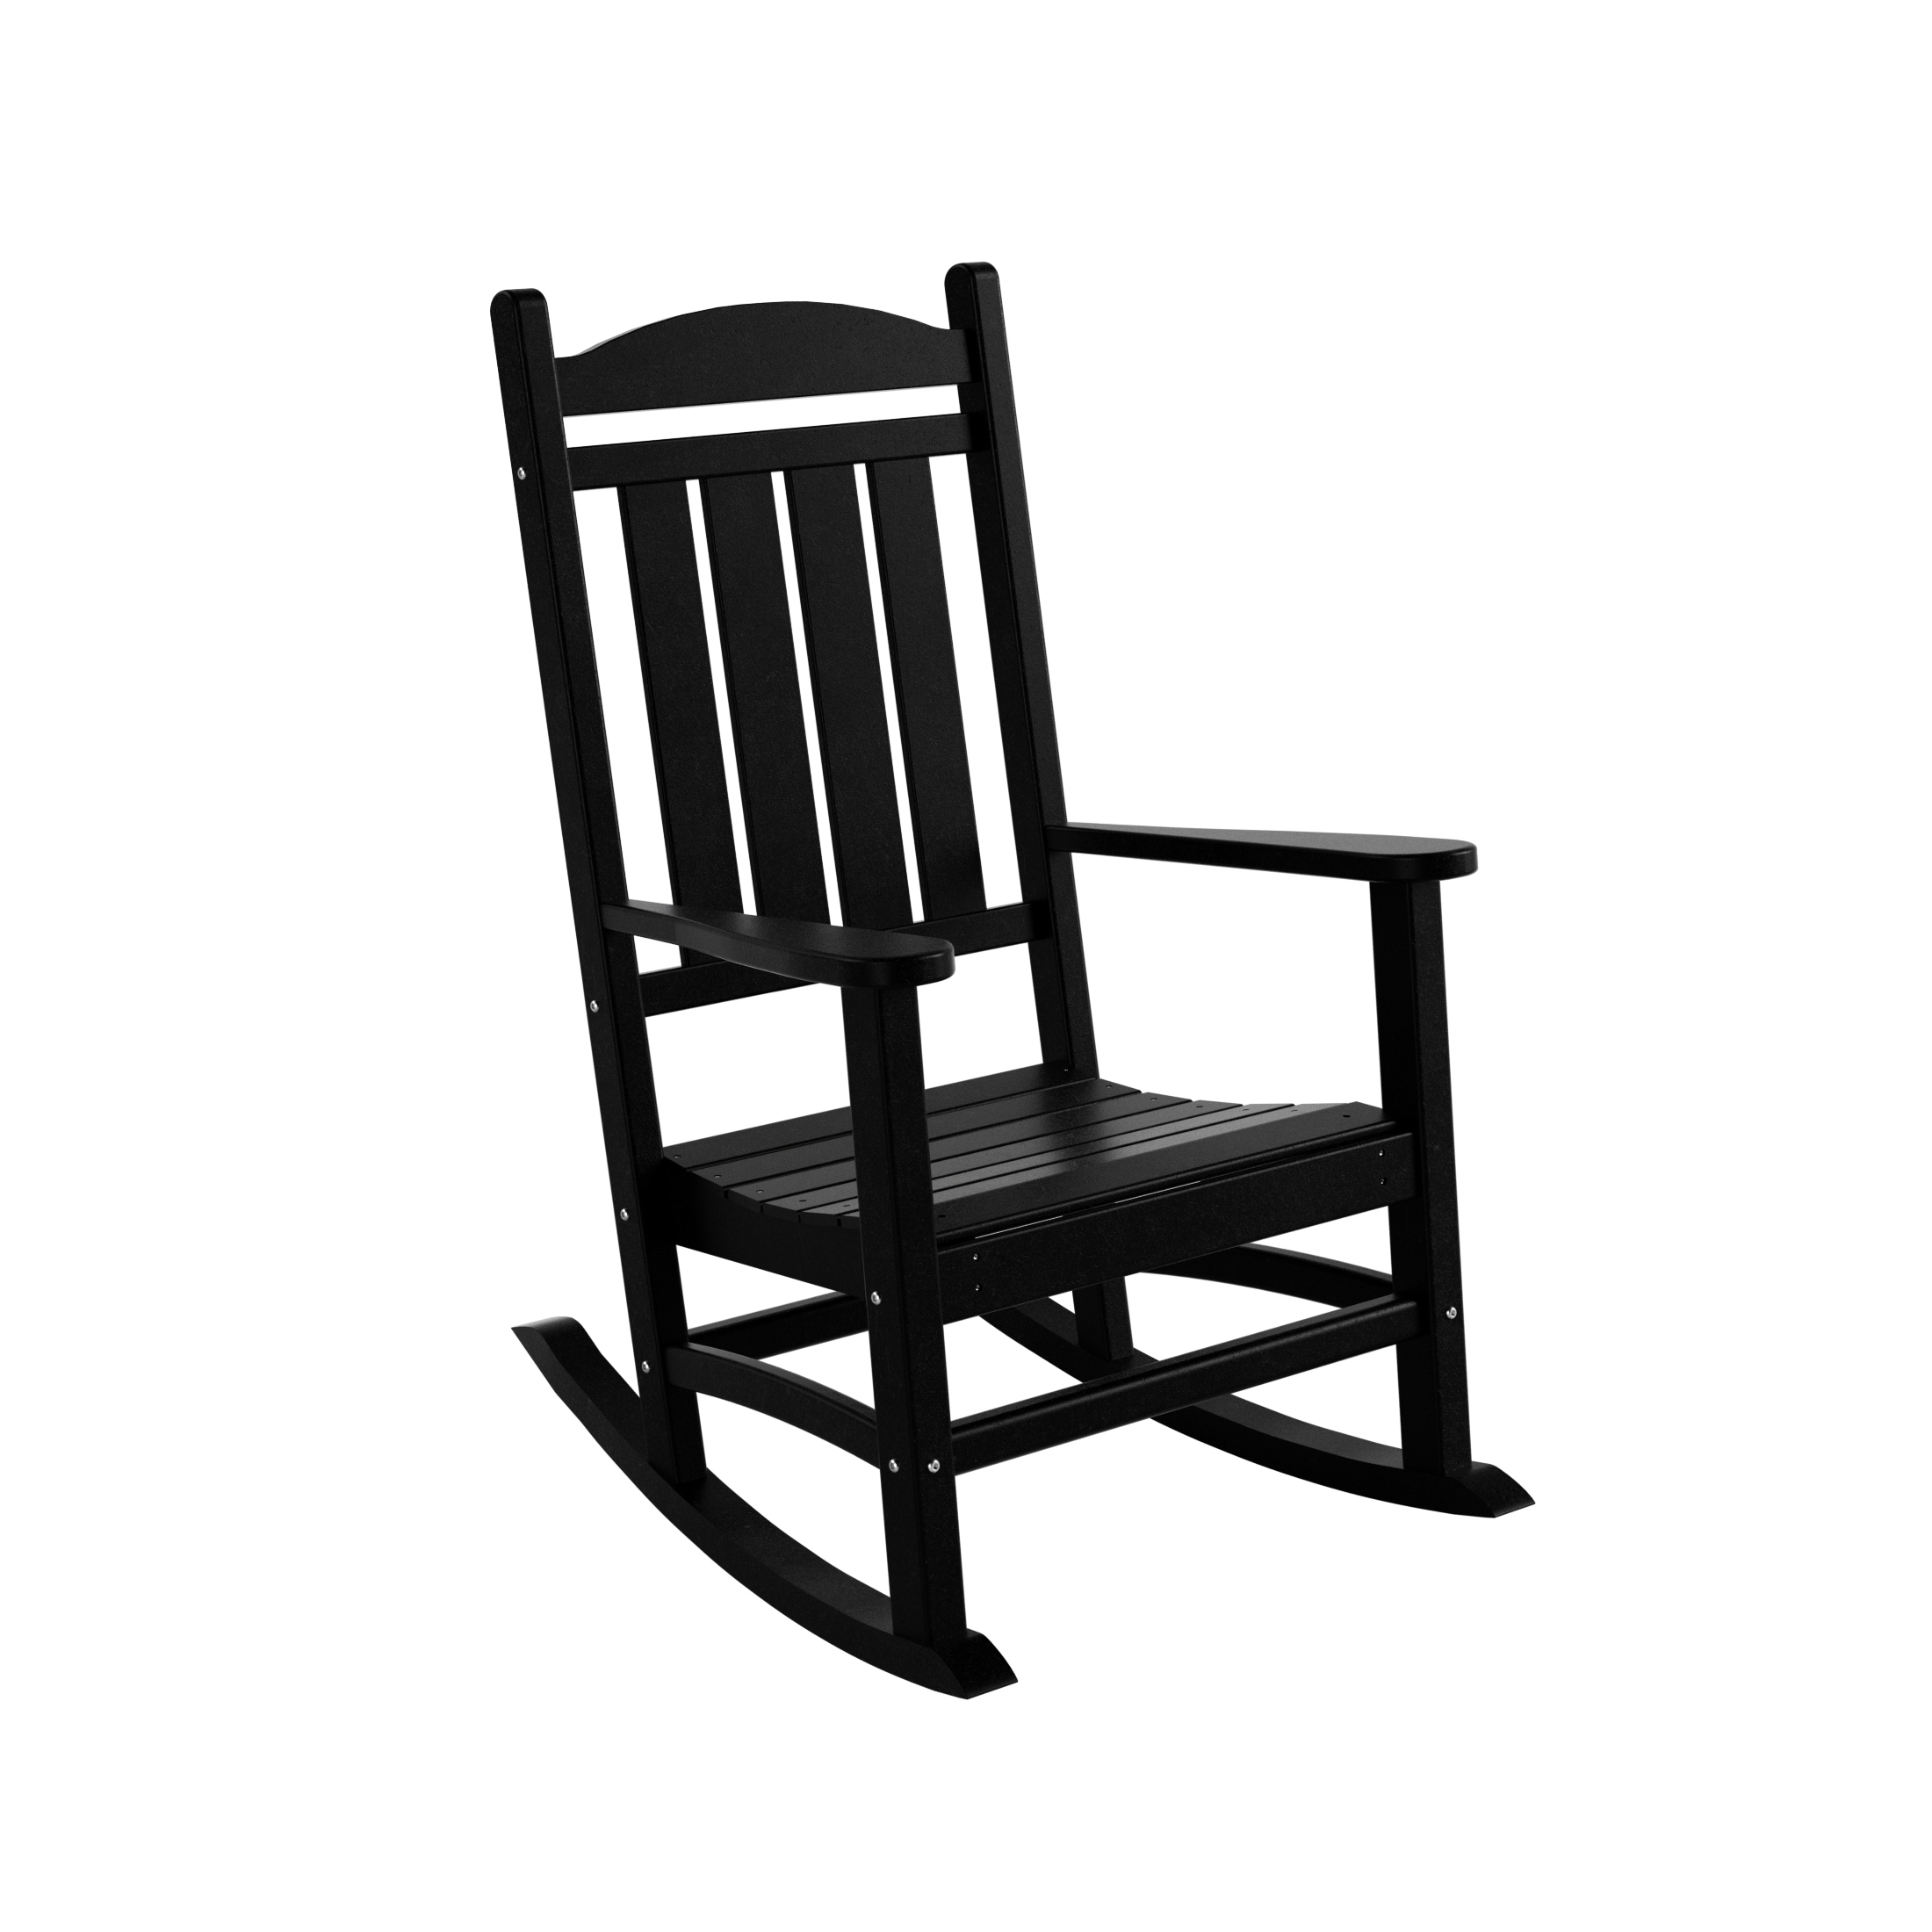 GARDEN 2-Piece Set Classic Plastic Porch Rocking Chair with Round Side Table Included, Black - image 4 of 7